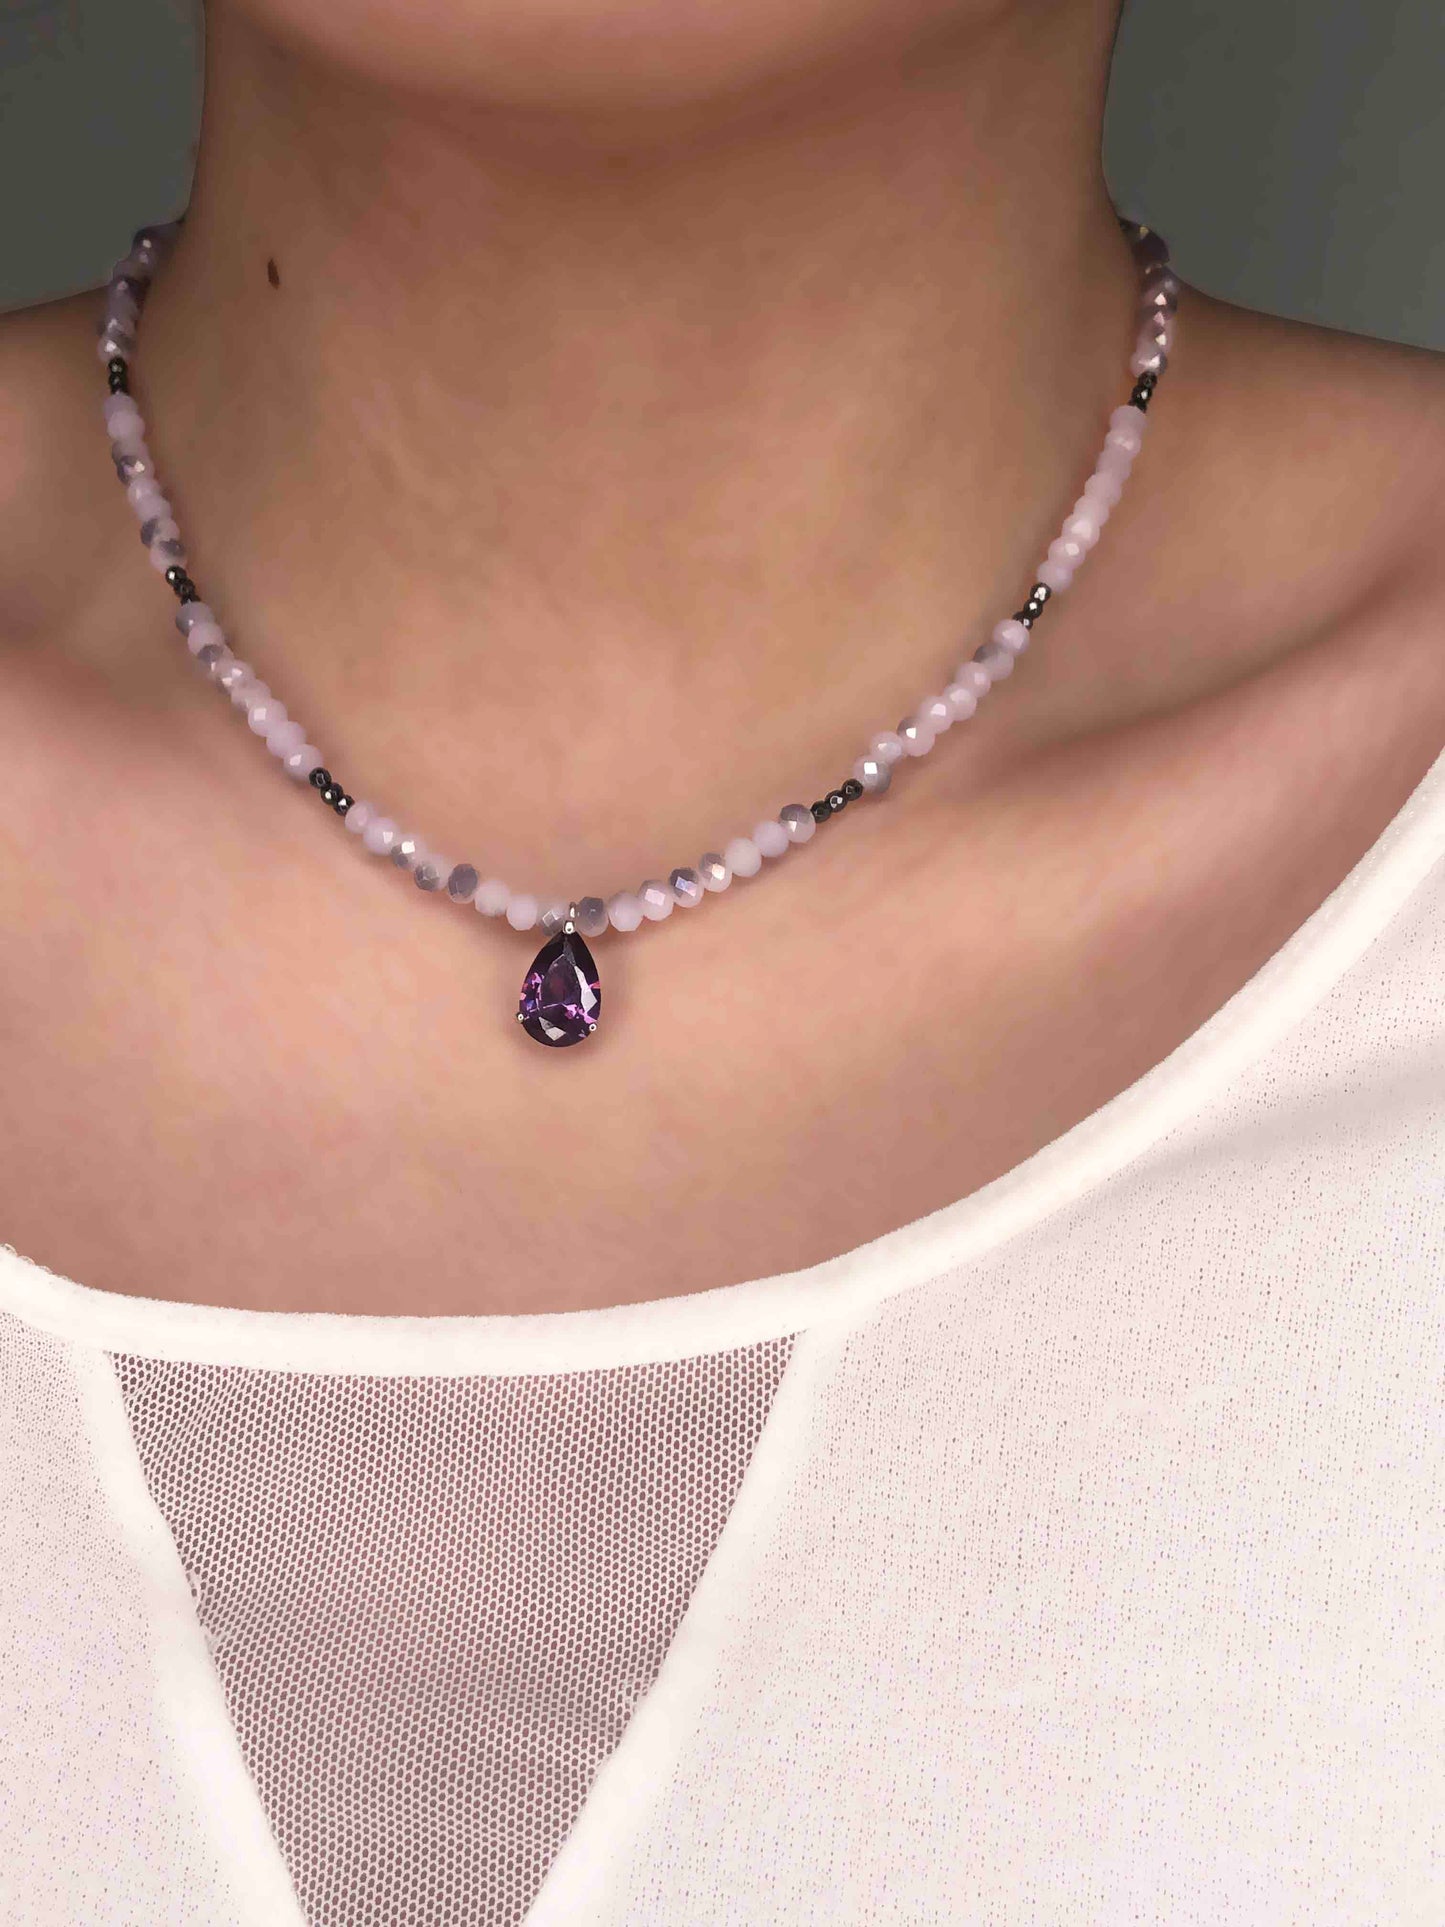 Handcrafted light purple and black crystal beaded necklace with a silver backed amethyst stone